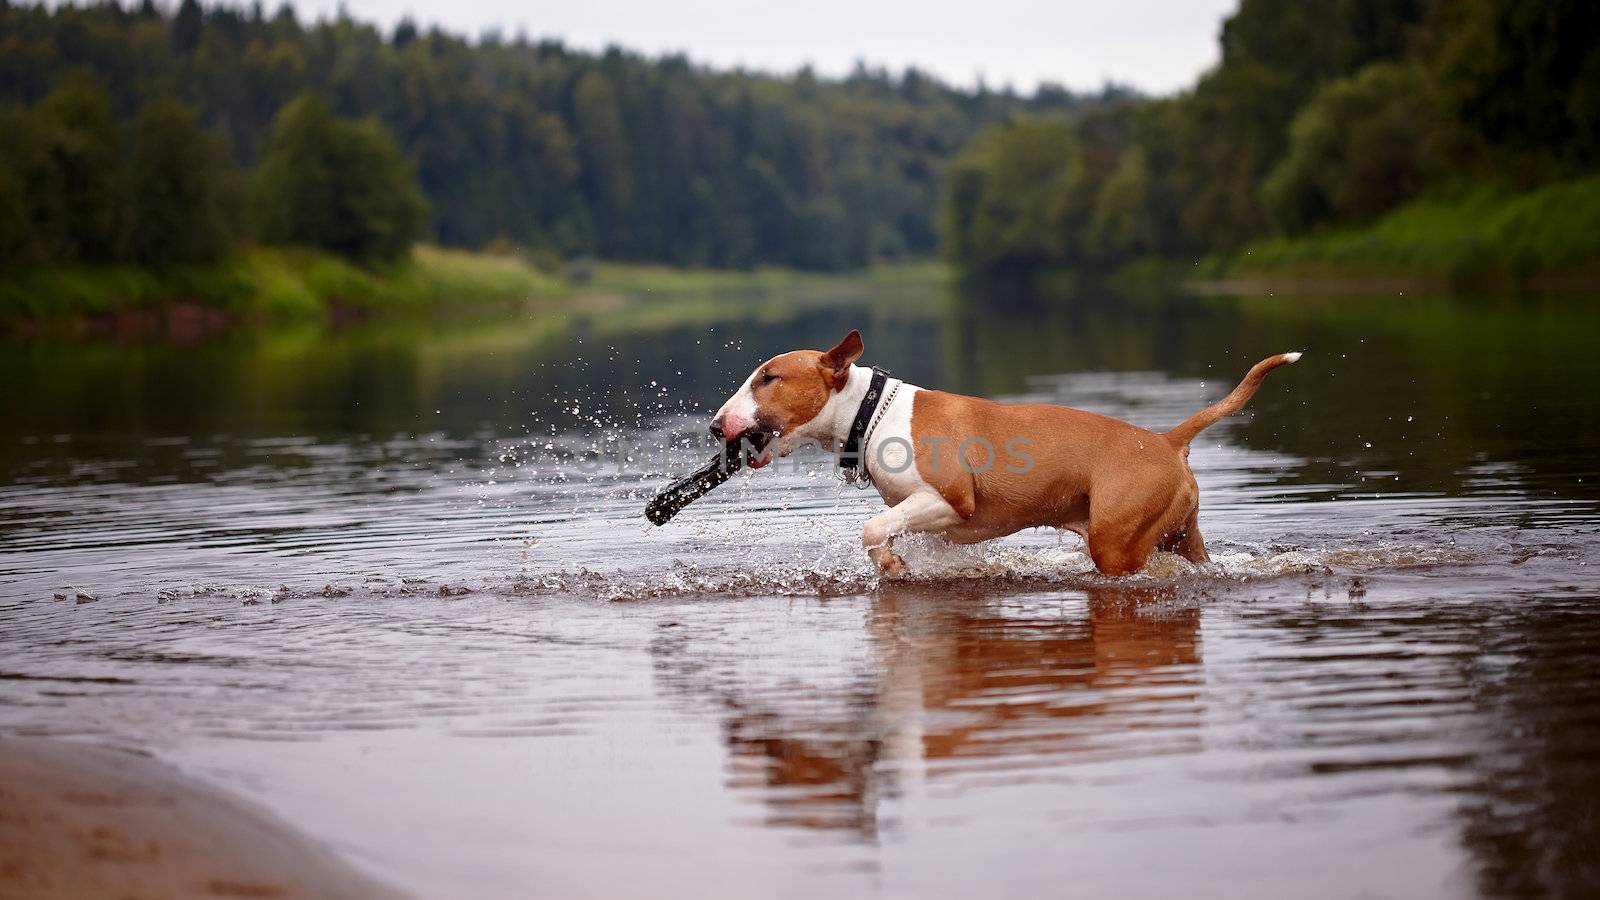 The bull terrier plays with a stick in the river by Azaliya